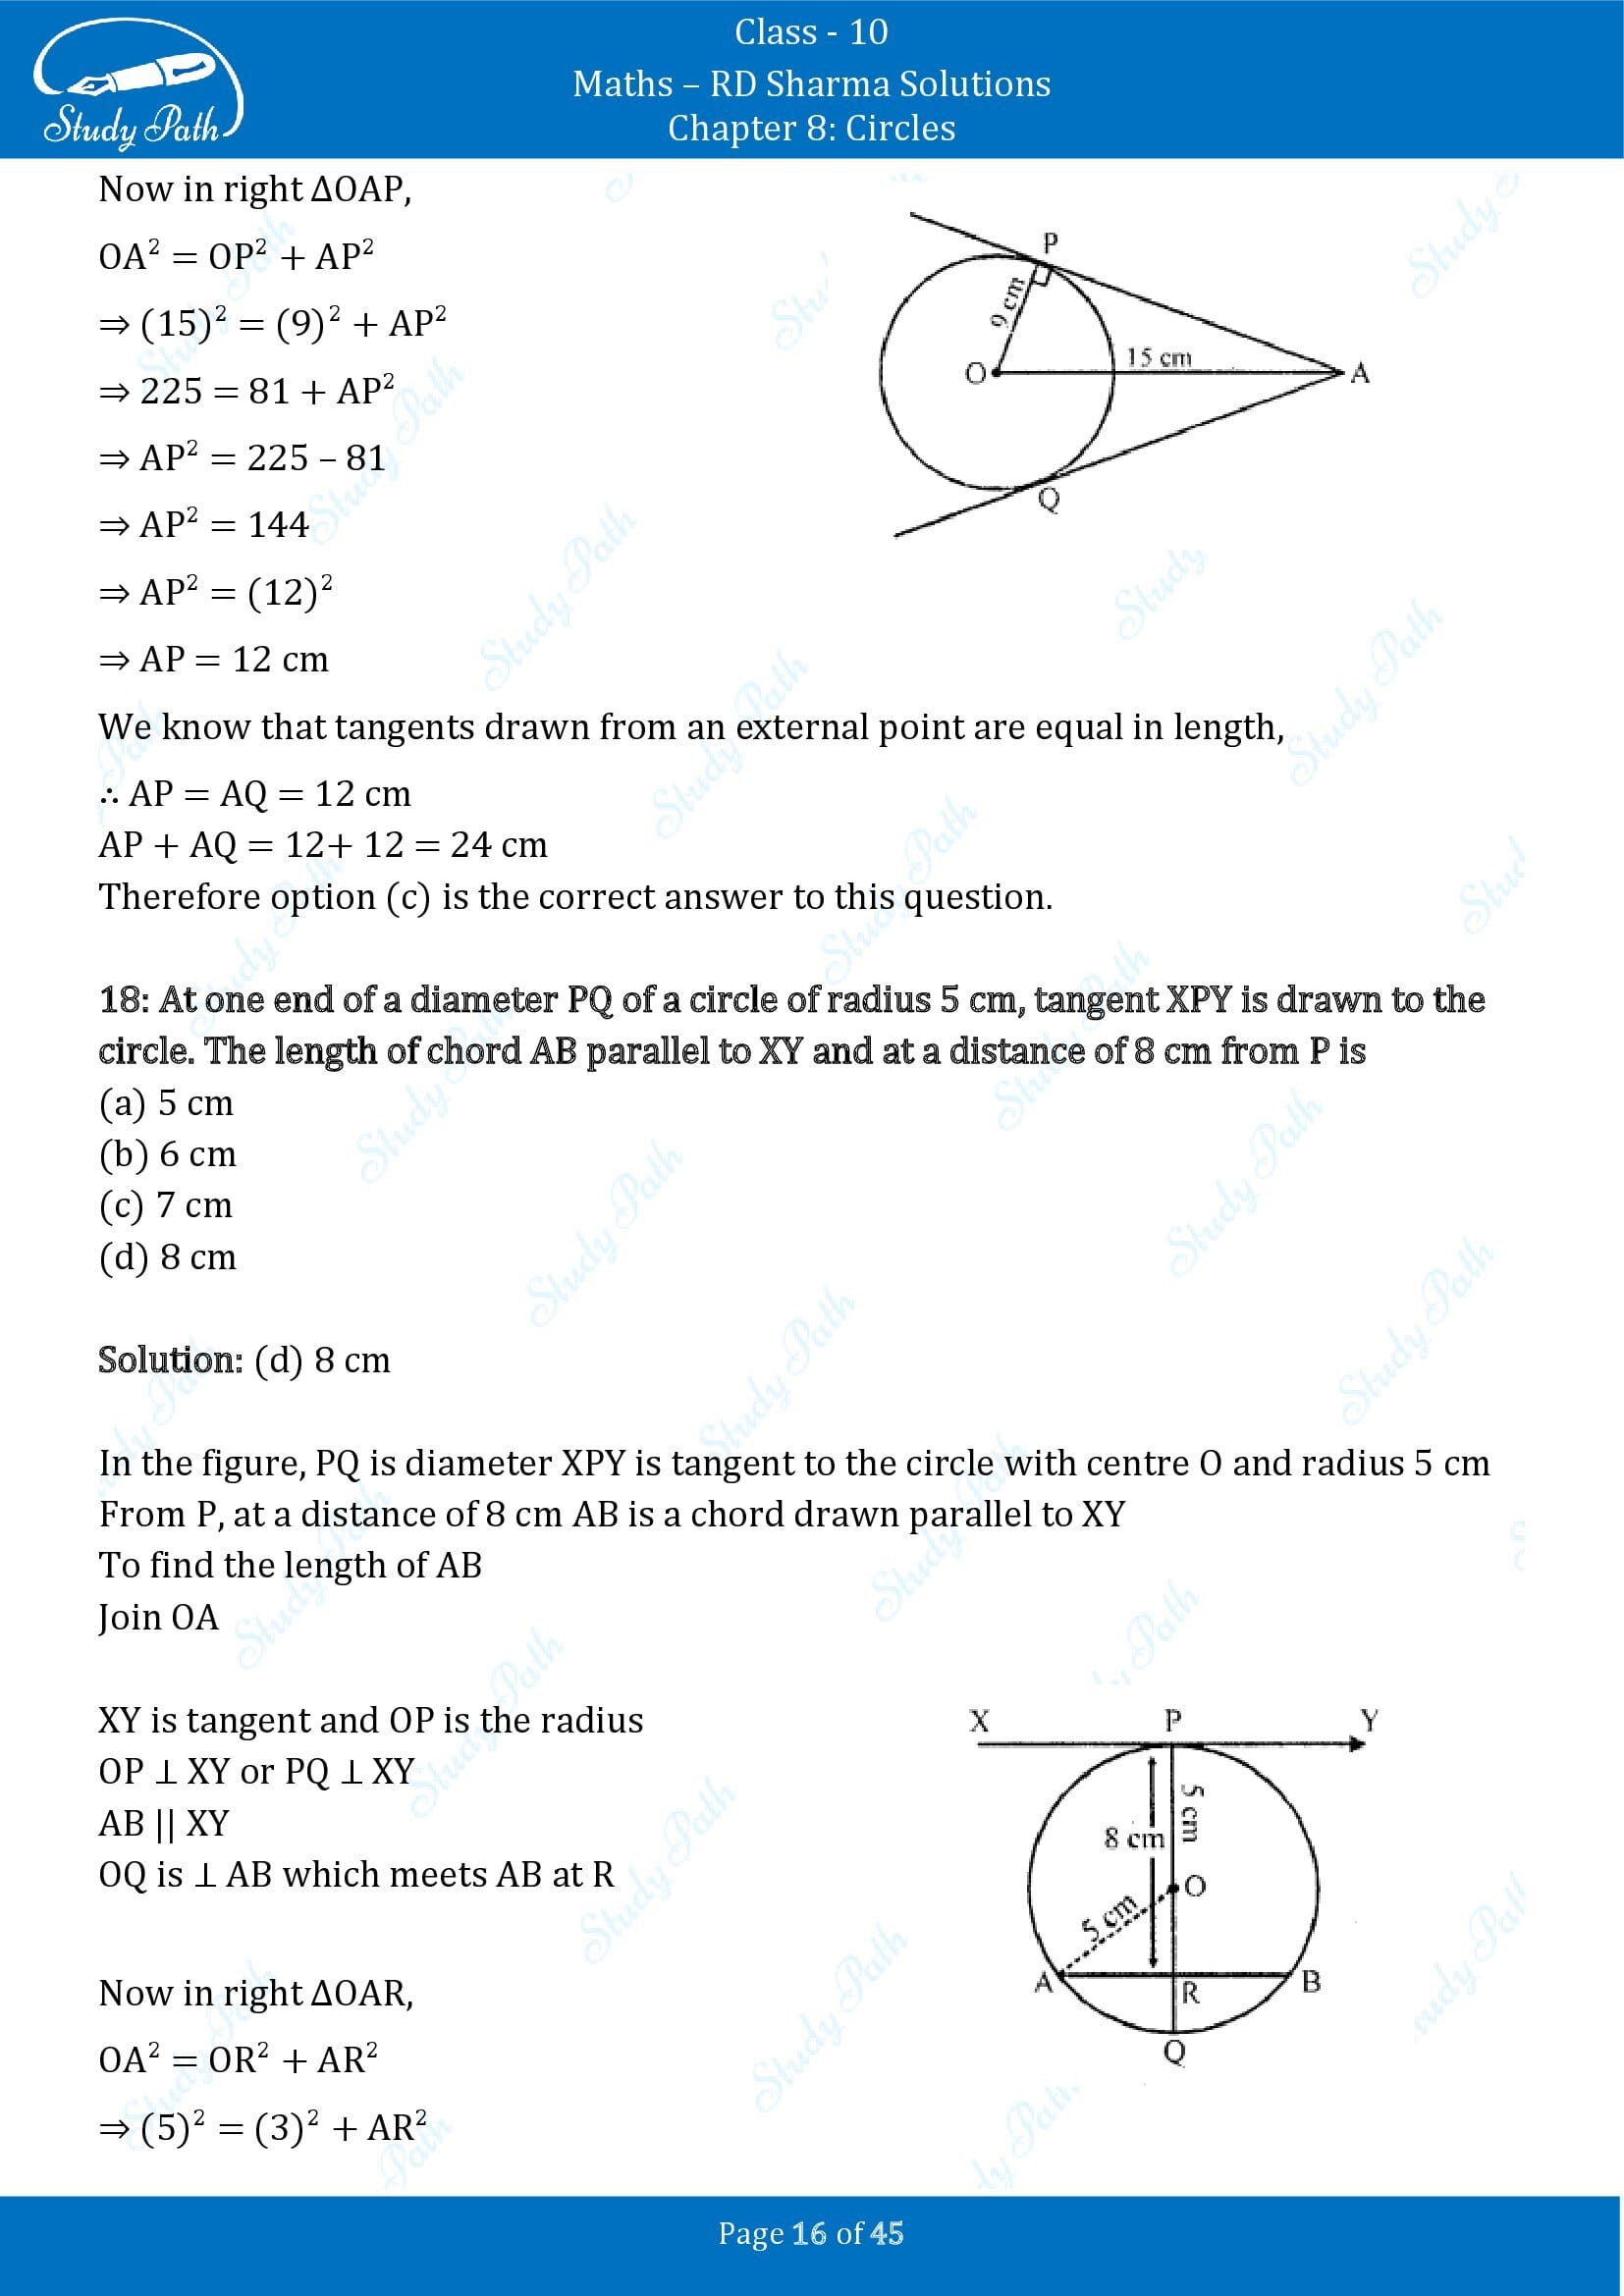 RD Sharma Solutions Class 10 Chapter 8 Circles Multiple Choice Questions MCQs 00016